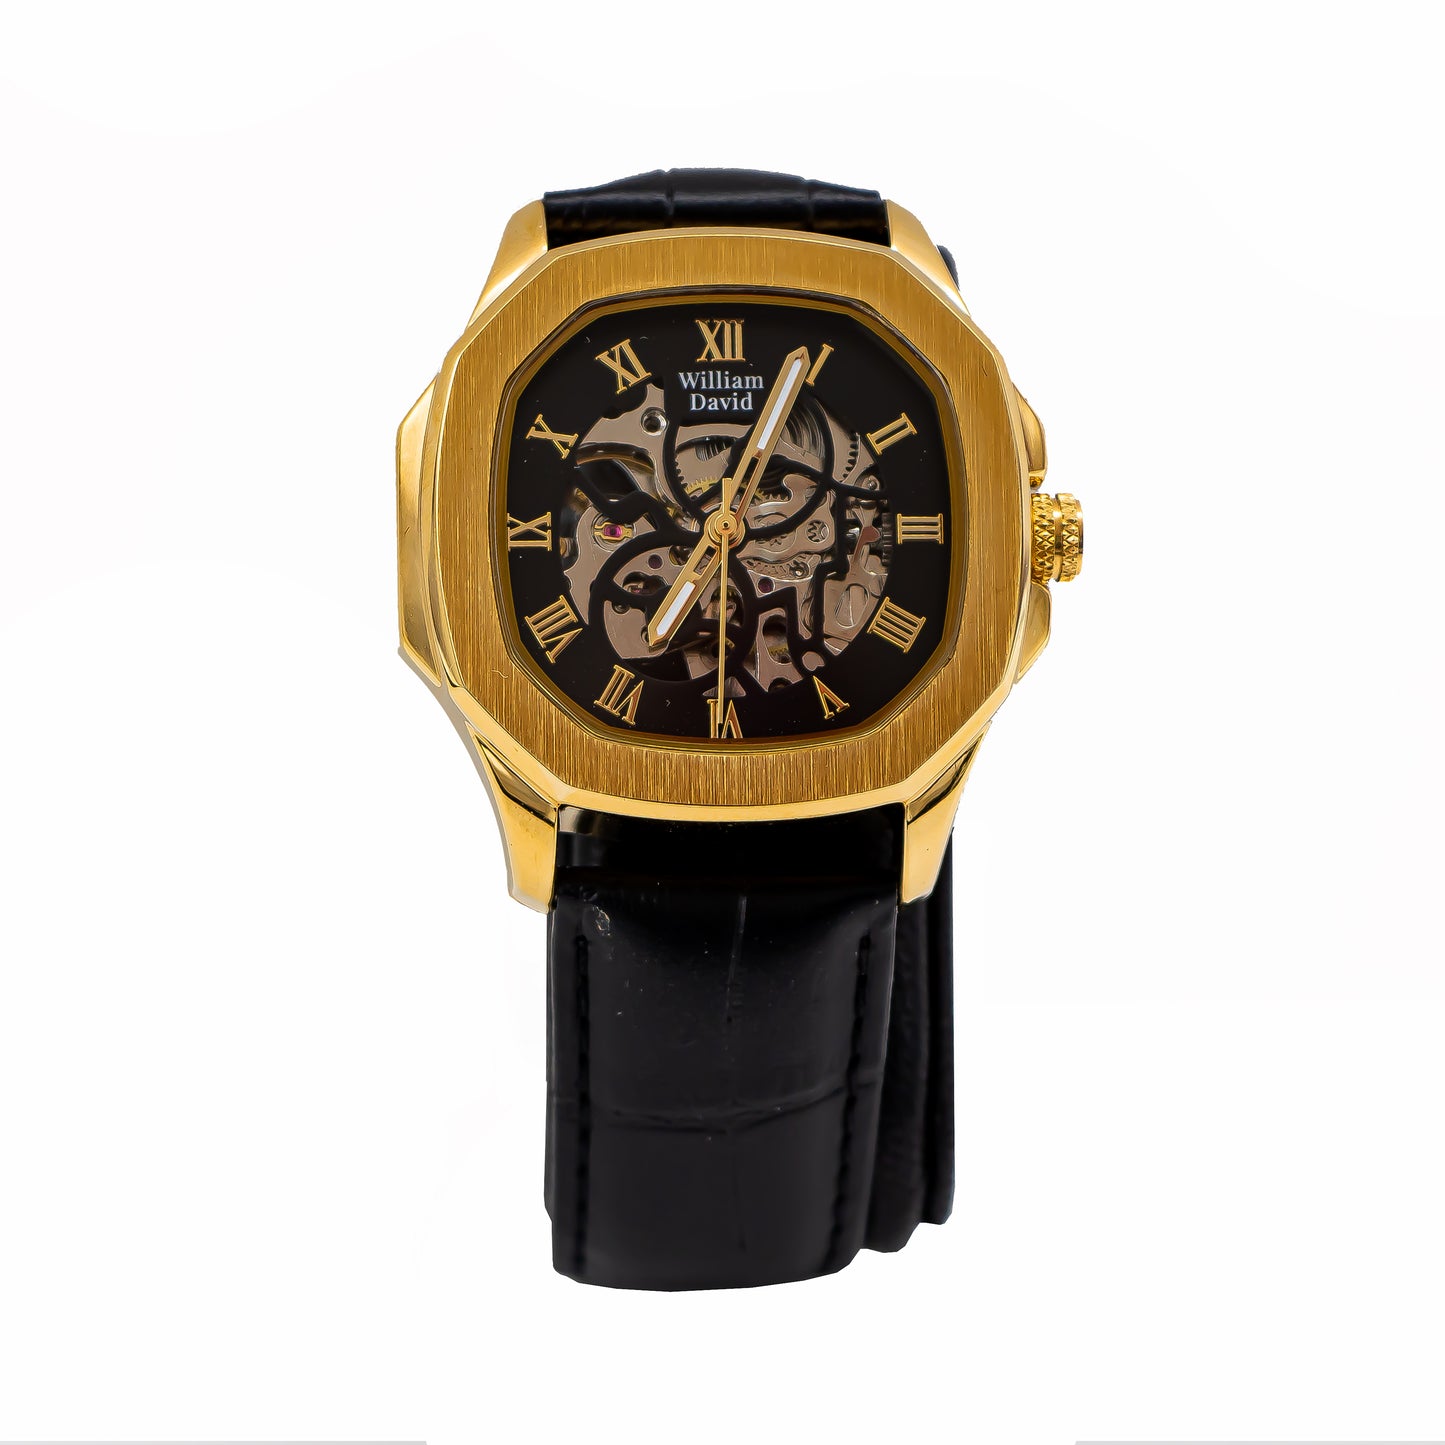 William David Watch Yellow Gold Color Alloy & Stainless Steel 42mm